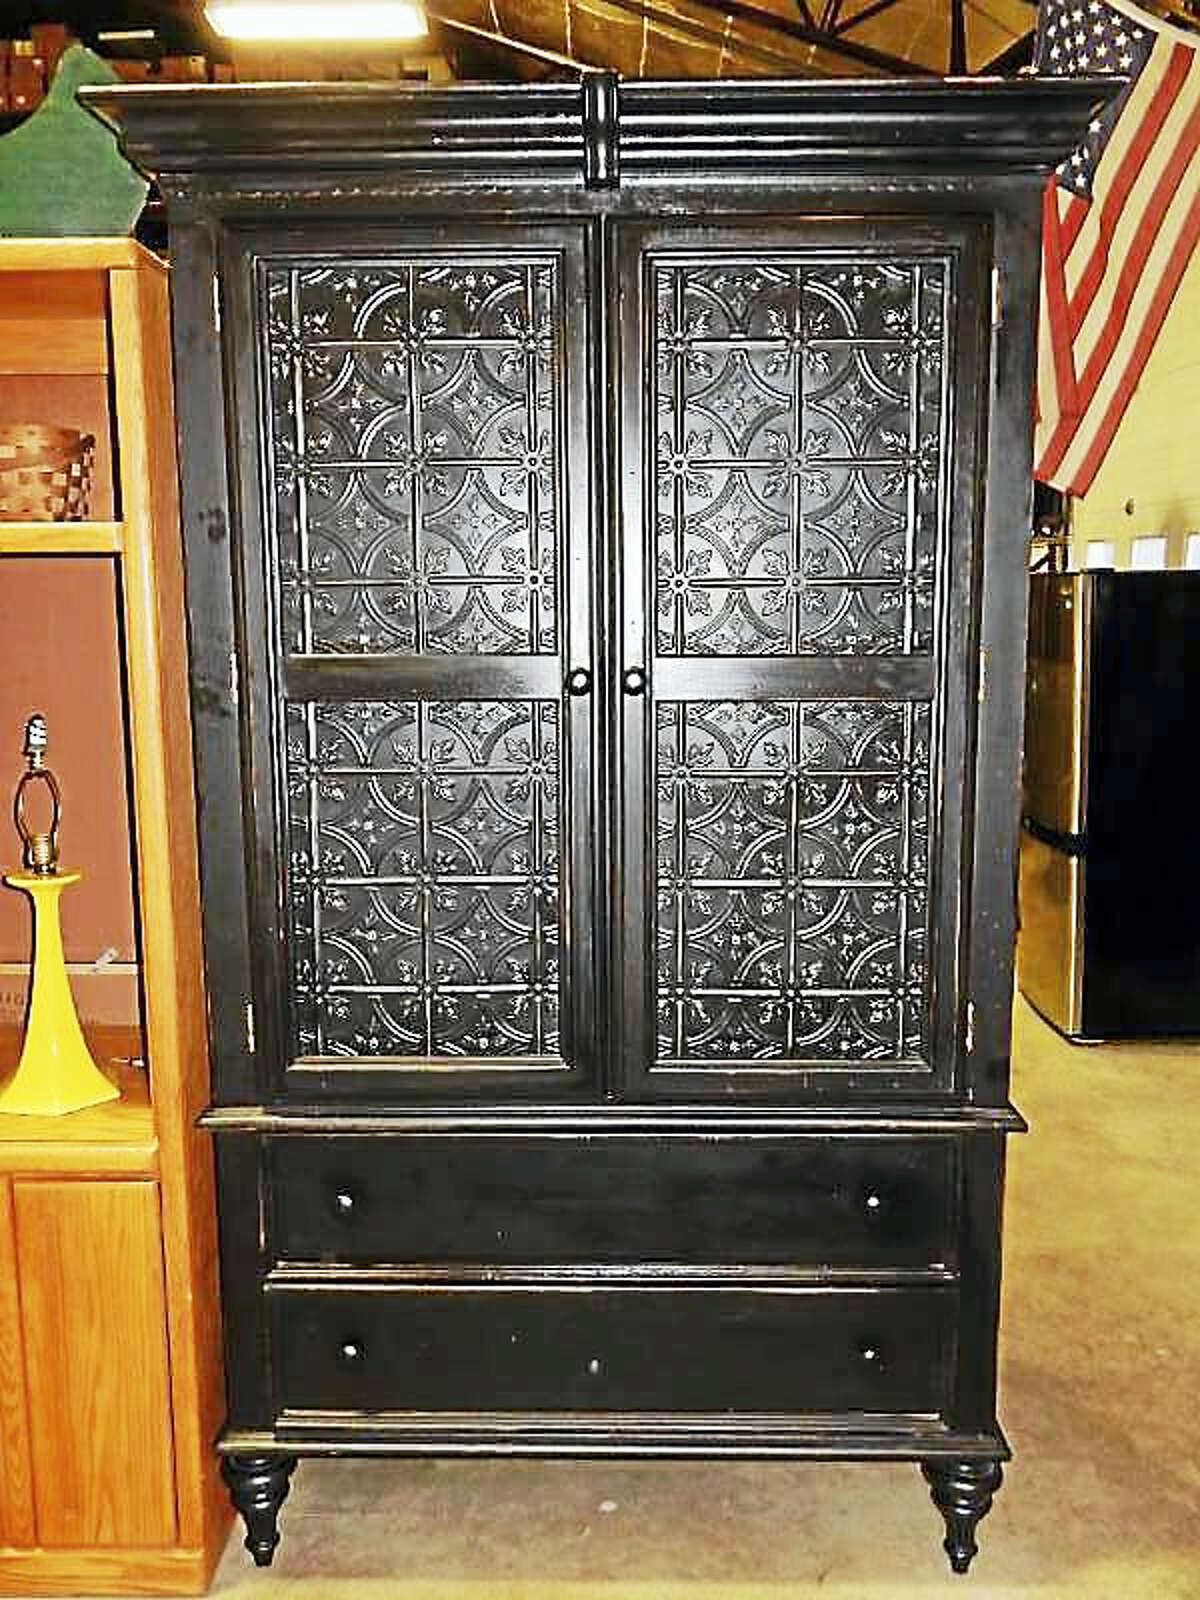 Photo courtesy of Bethlehem Indoor Flea Market Antique furniture pieces are just part of the inventory that can be found at the Bethlehem Indoor Flea Market.